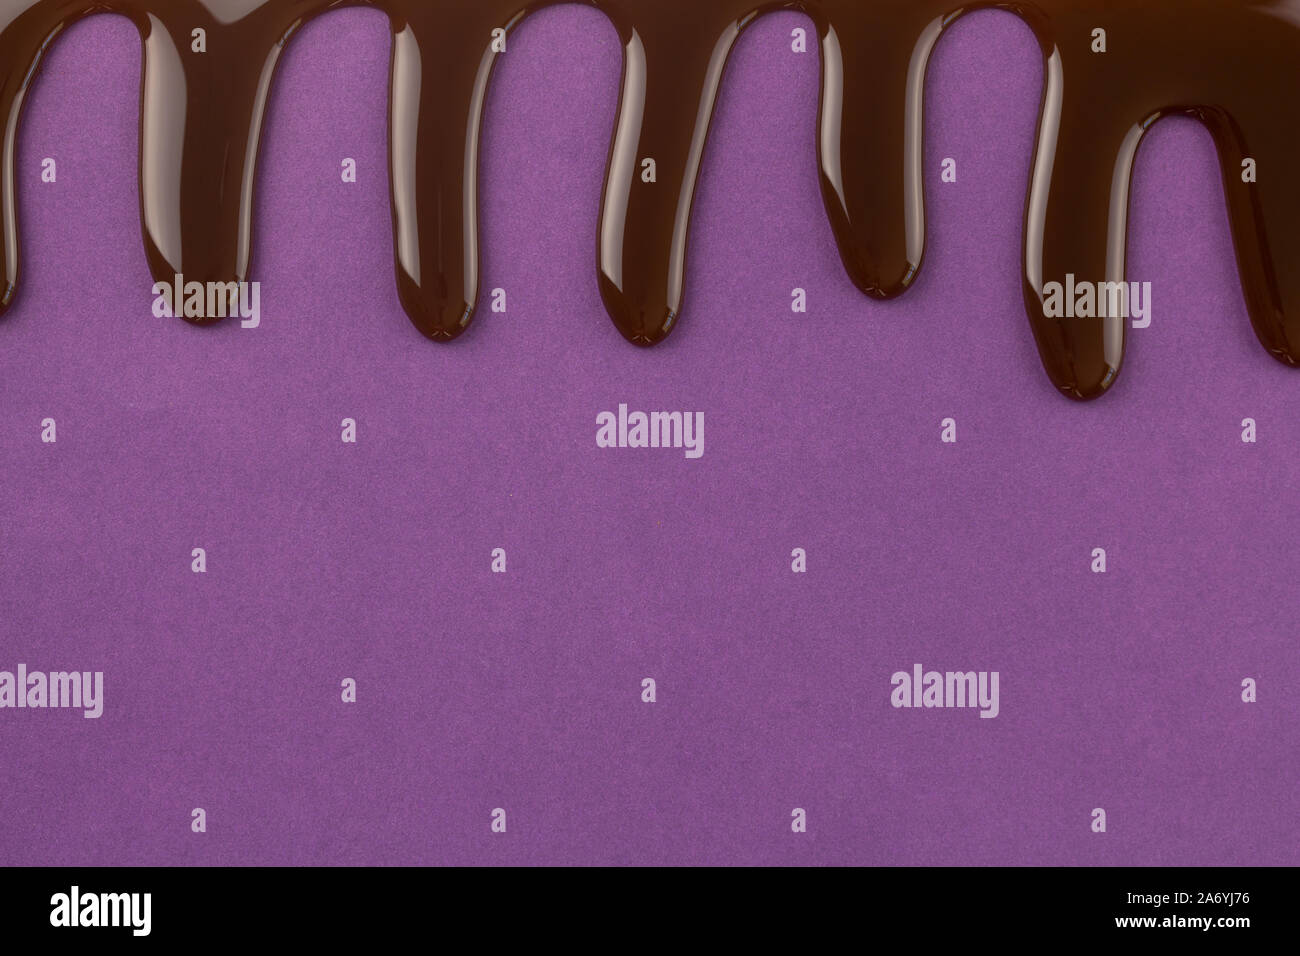 Chocolate dripping down from top of purple background with space for text at bottom of  purple birthday celebration background Stock Photo